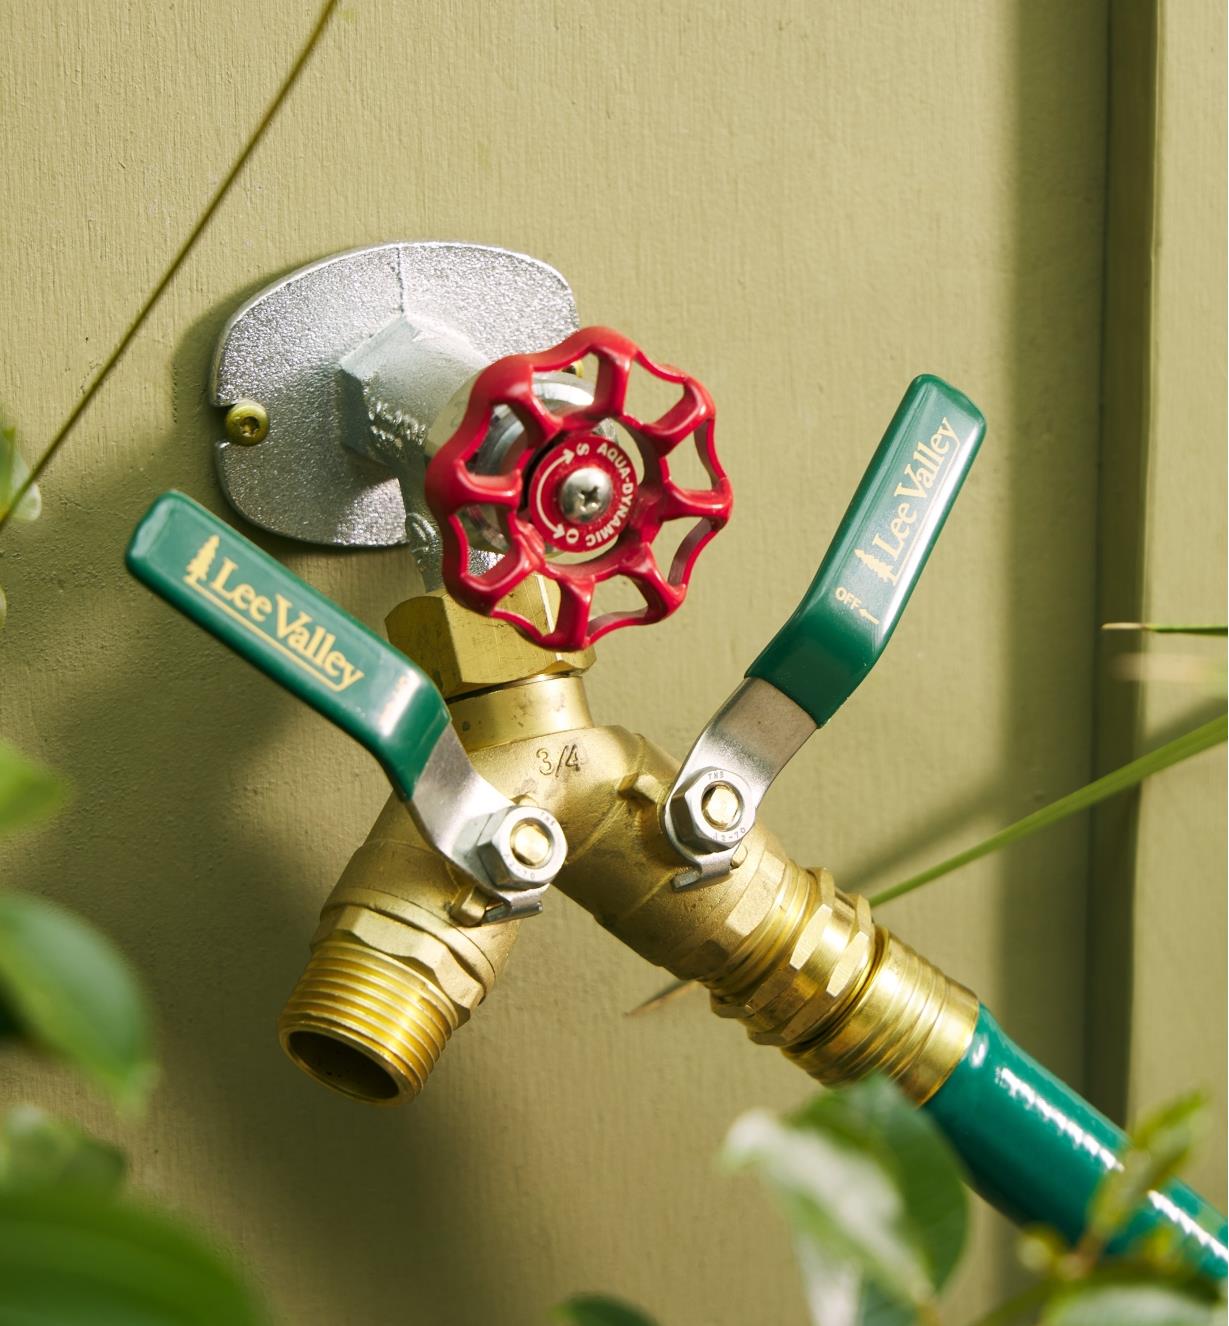 A Y shut-off valve on a faucet with a hose connected to one side